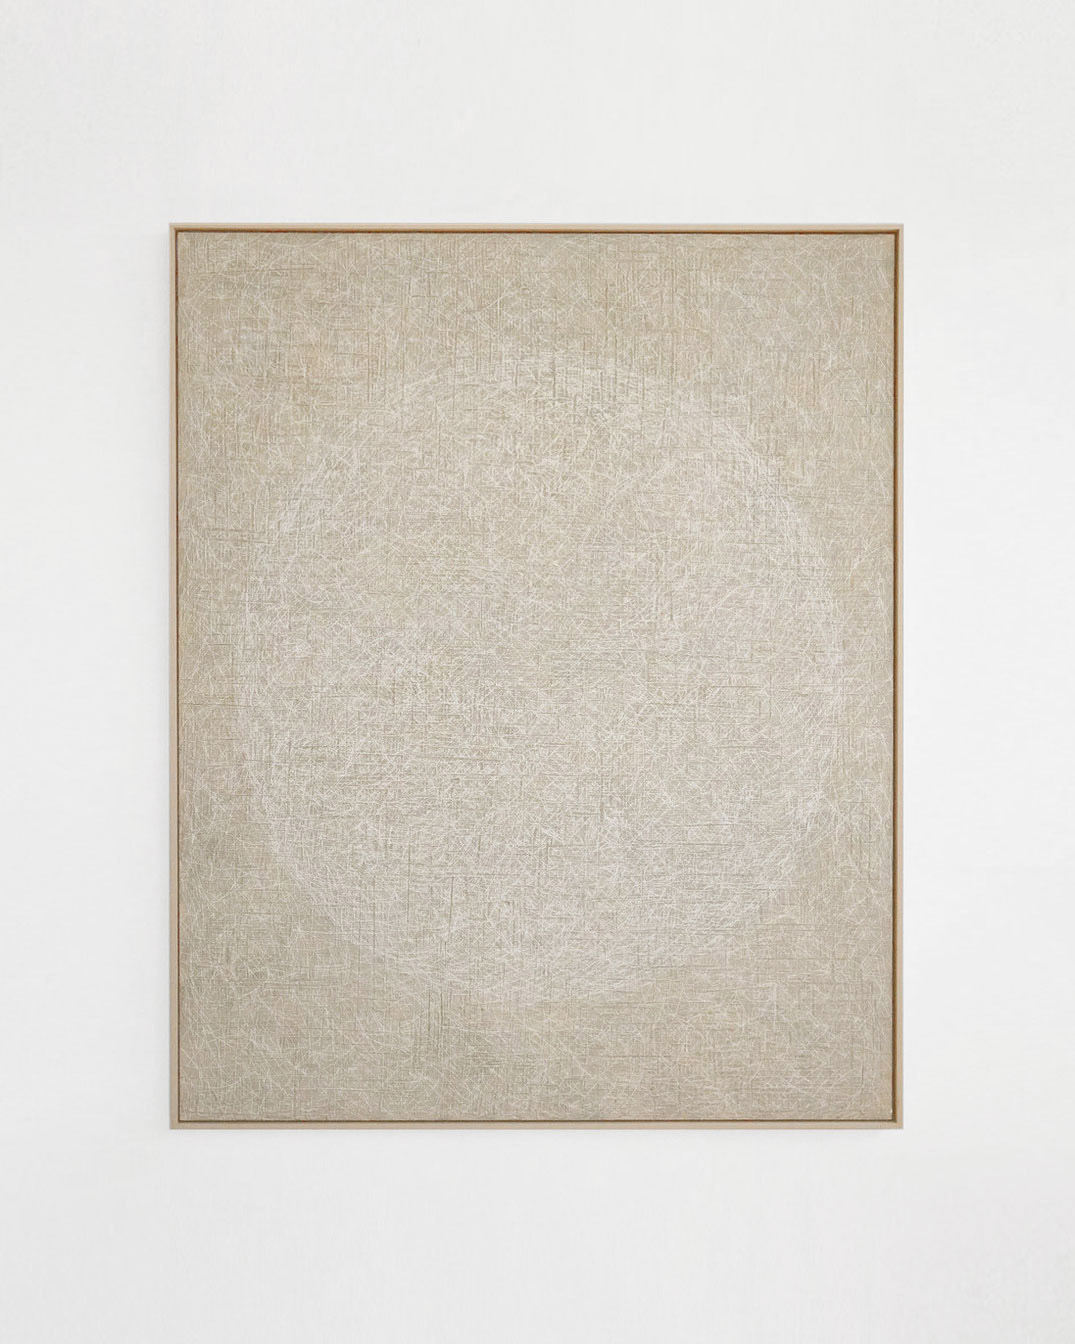 Woo Byoung Yun, Superposition No.23-02-186, 2023, Plaster & gouache on wood panel, 163.2 x 130.3 cm